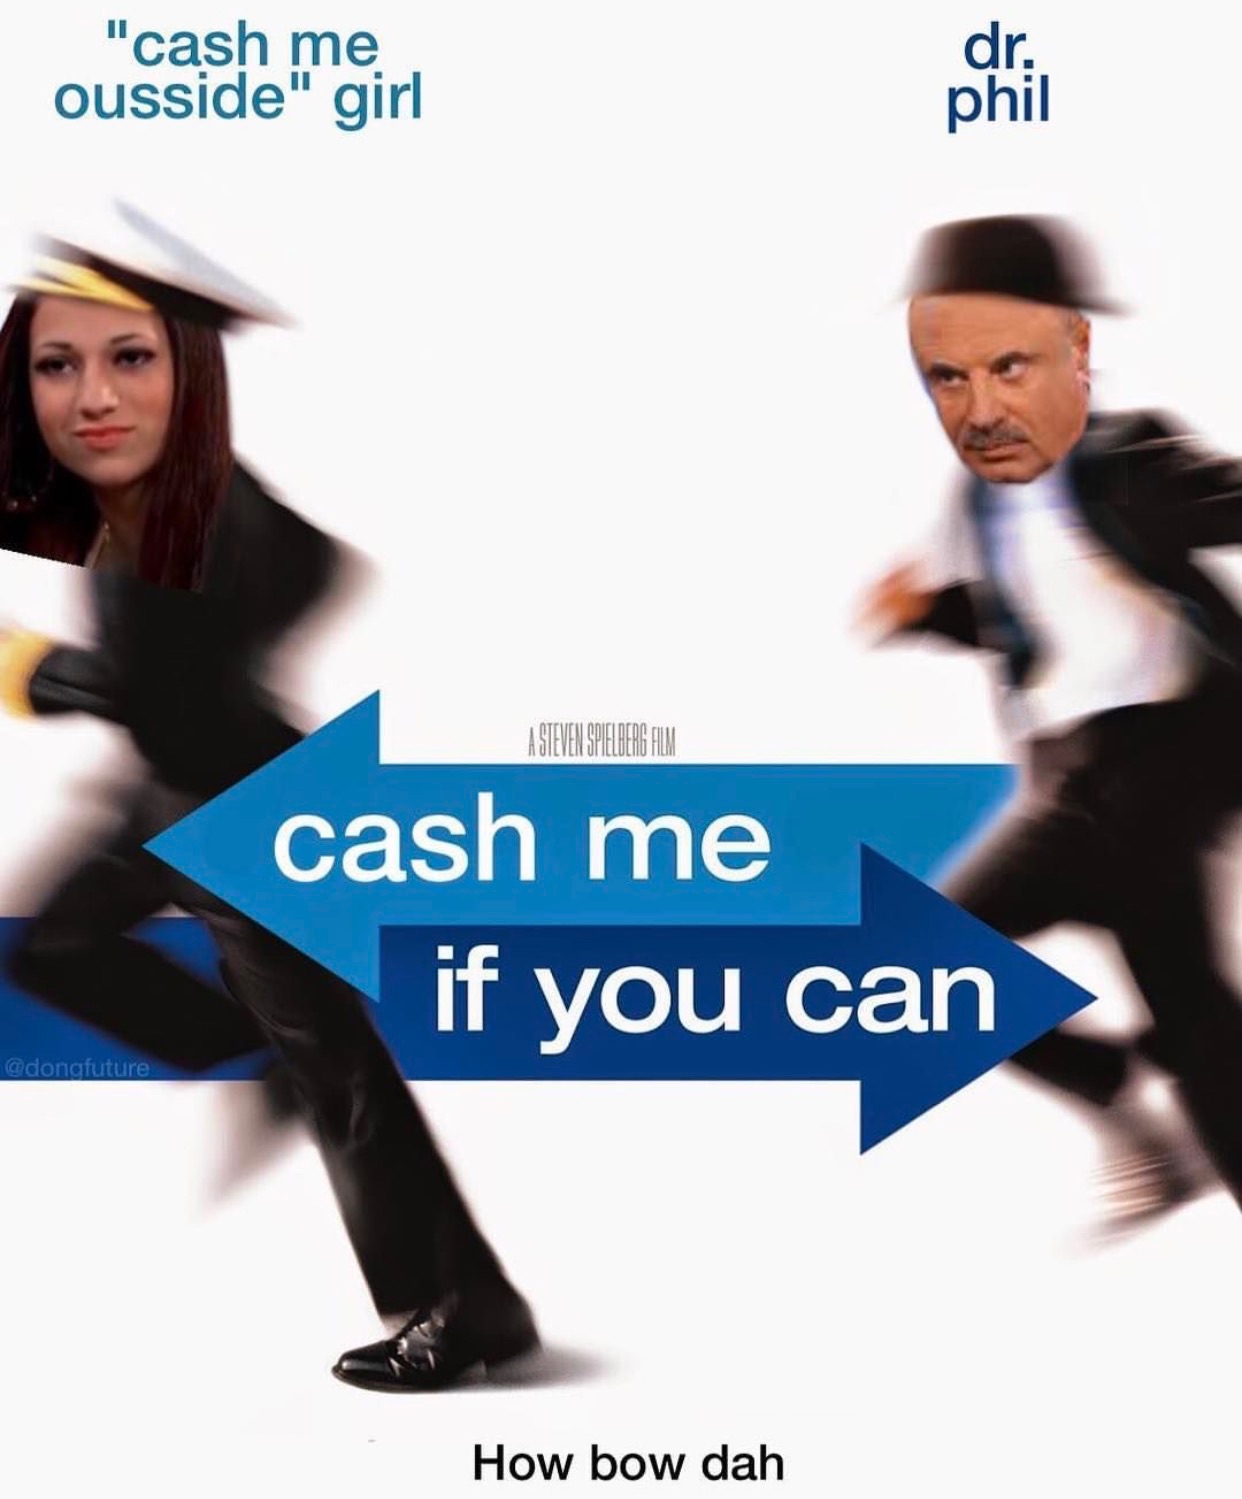 catch me if you can movie made - "cash me ousside" girl A Steven Spielberg Film cash me if you can How bow dah